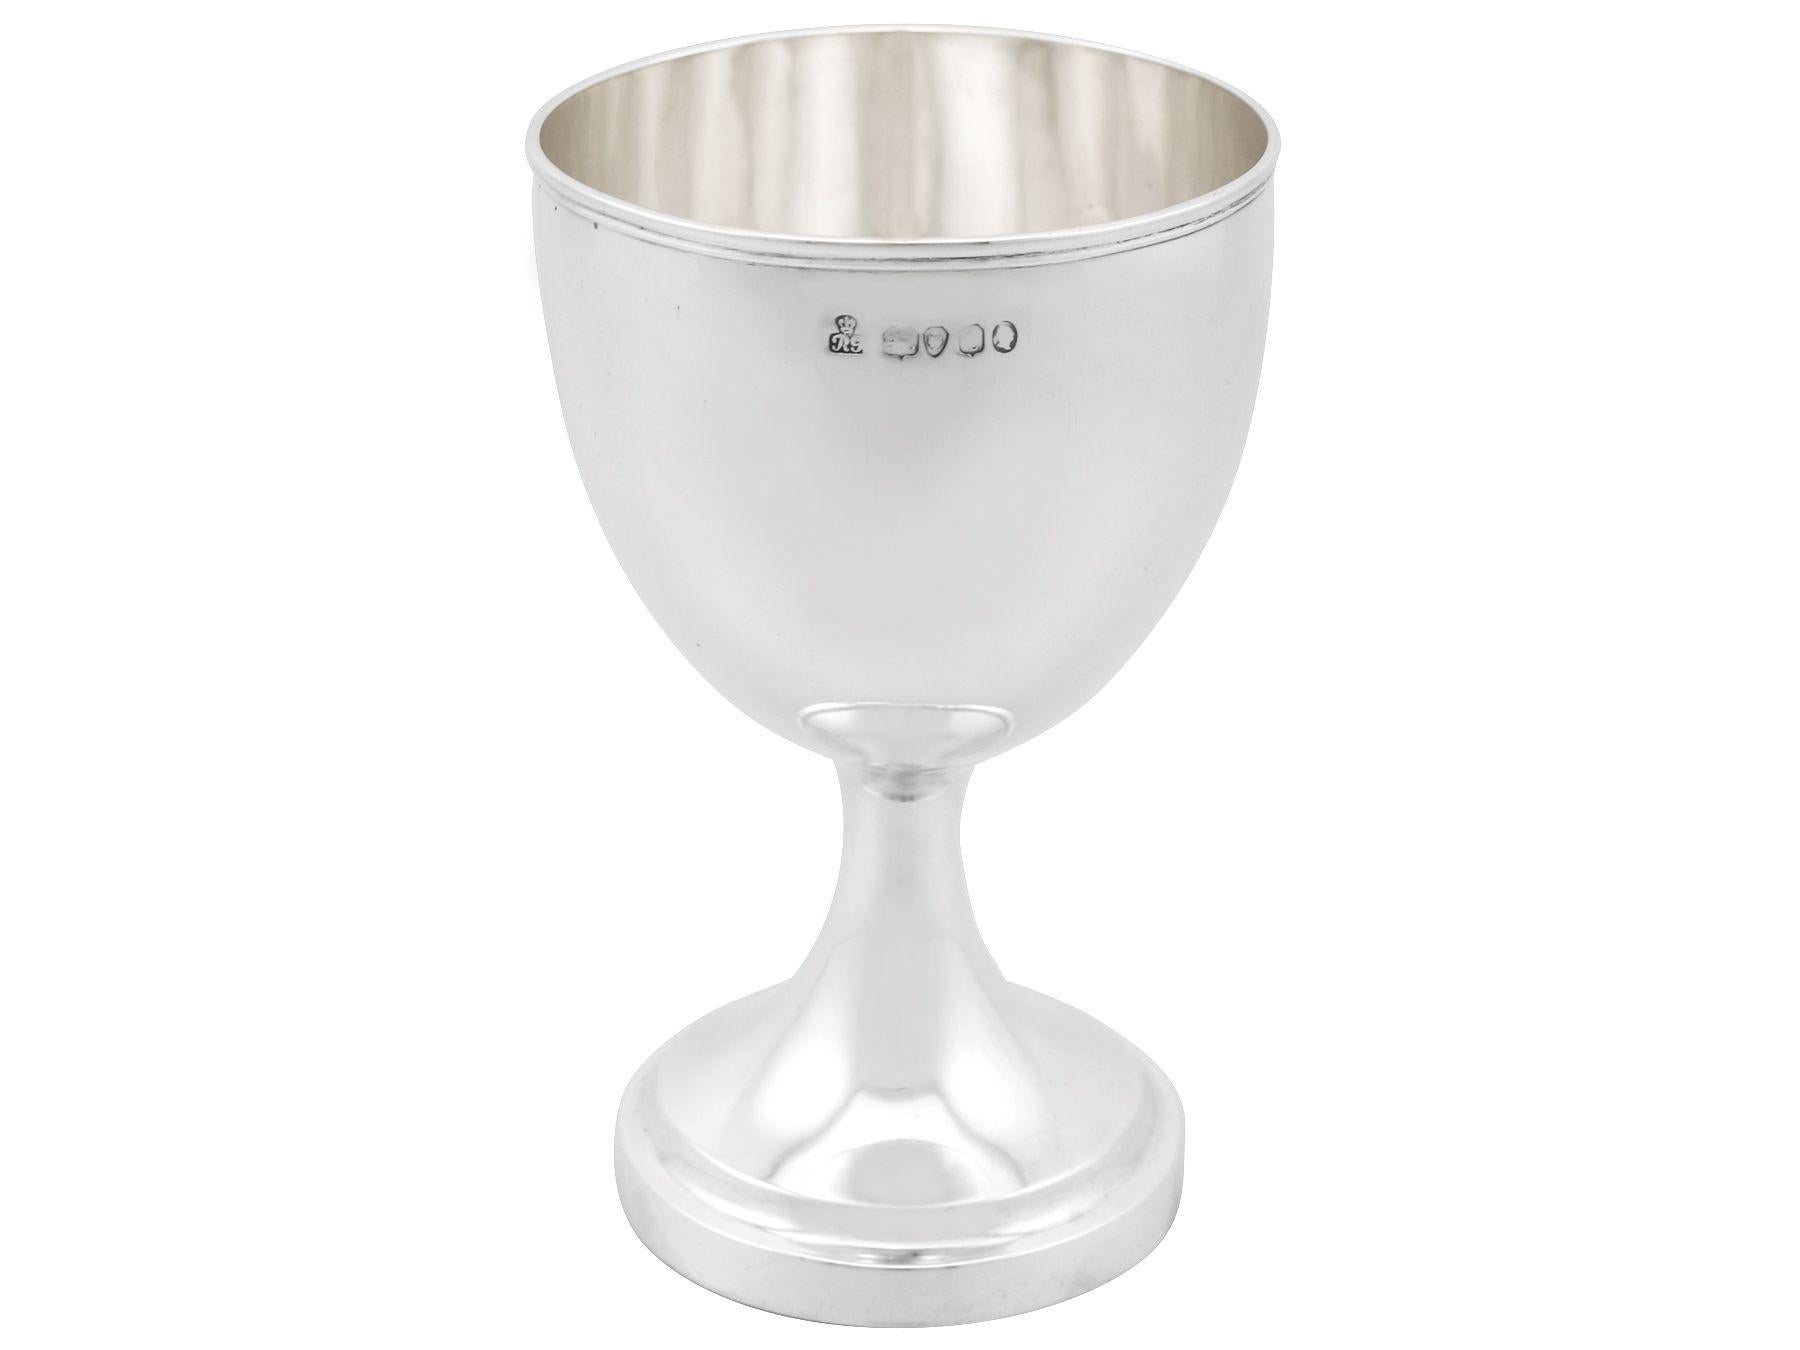 An exceptional, fine and impressive antique William IV English sterling silver goblet made by Robert Garrard II; an addition to our collectable silverware collection.

This exceptional antique William IV sterling silver goblet has a plain bell